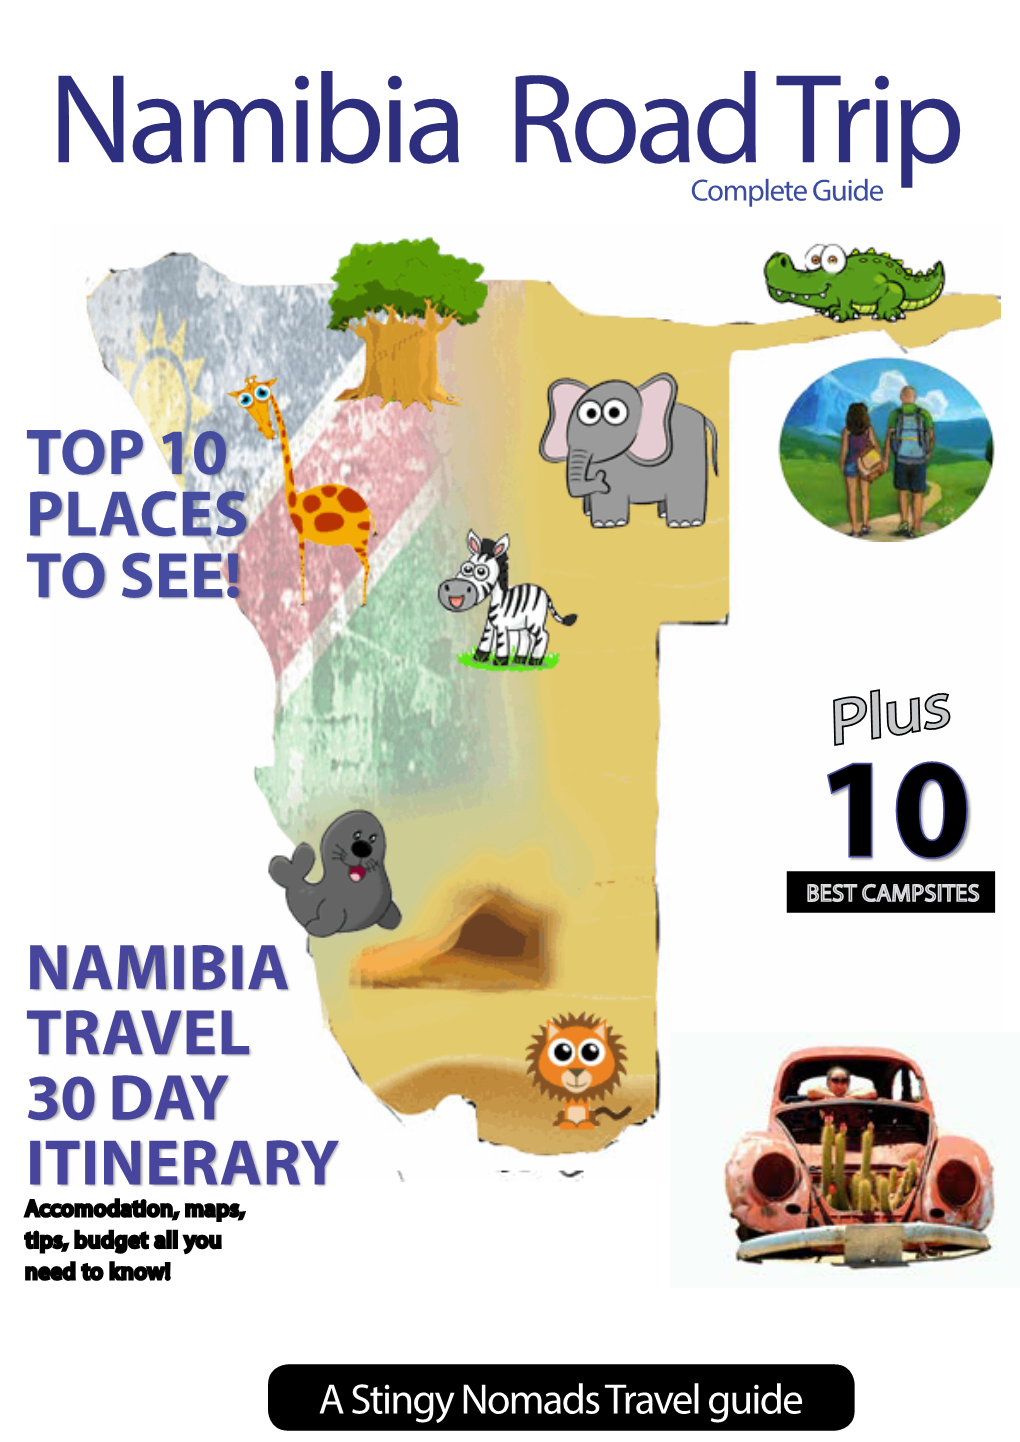 Namibia Travel 30 Day Itinerary Accomodation, Maps, Tips, Budget All You Need to Know!